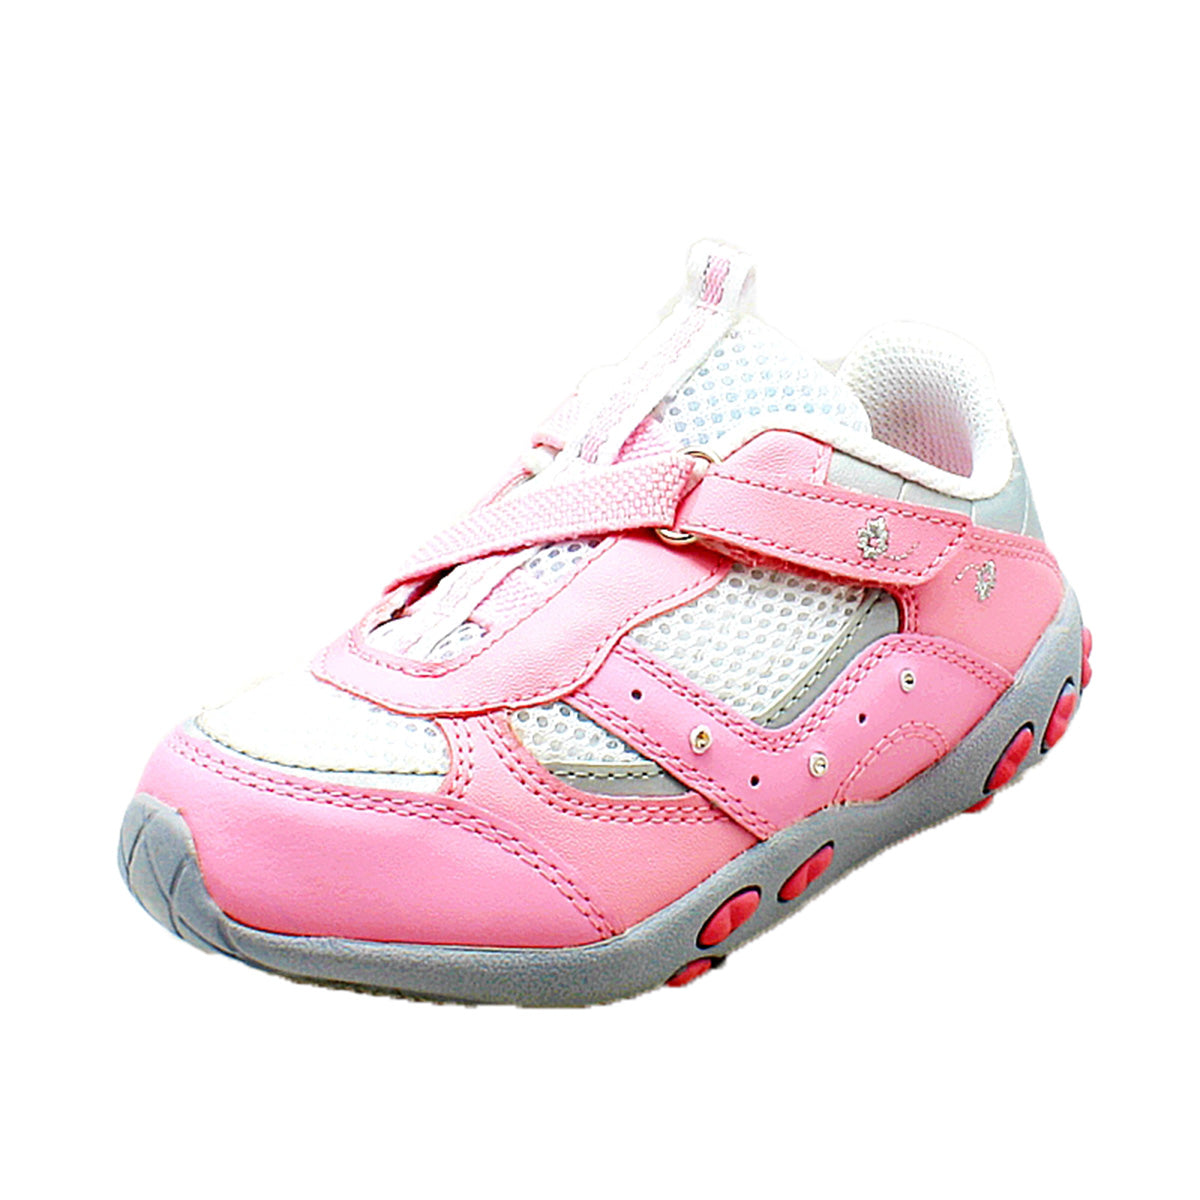 Children's pink leather inner adjustable fastening trainers